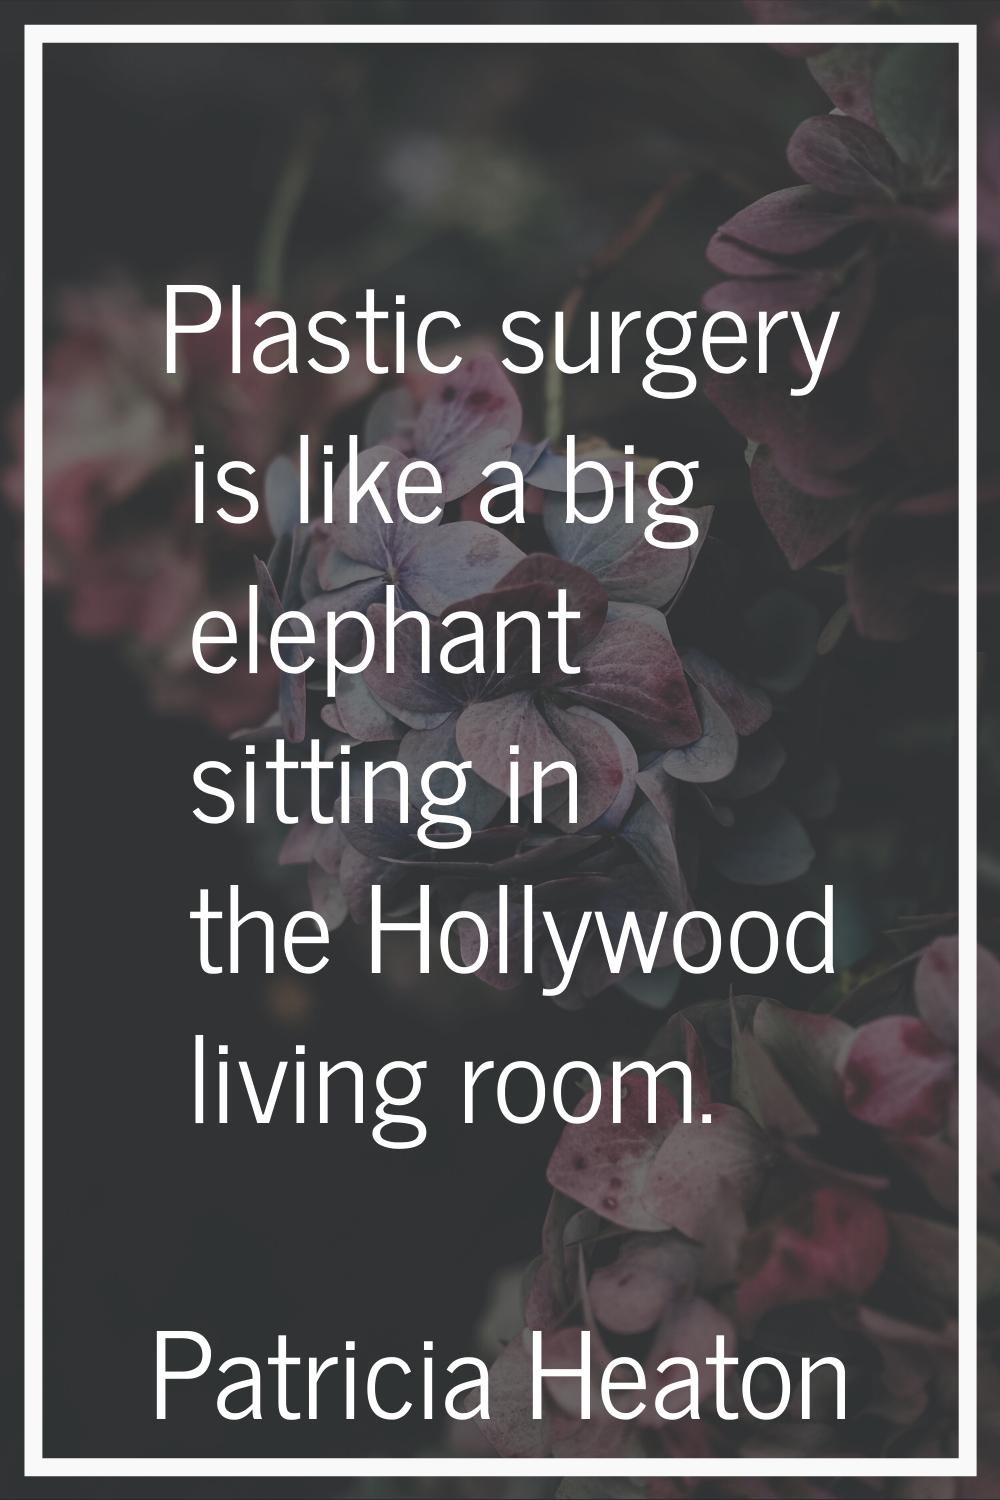 Plastic surgery is like a big elephant sitting in the Hollywood living room.